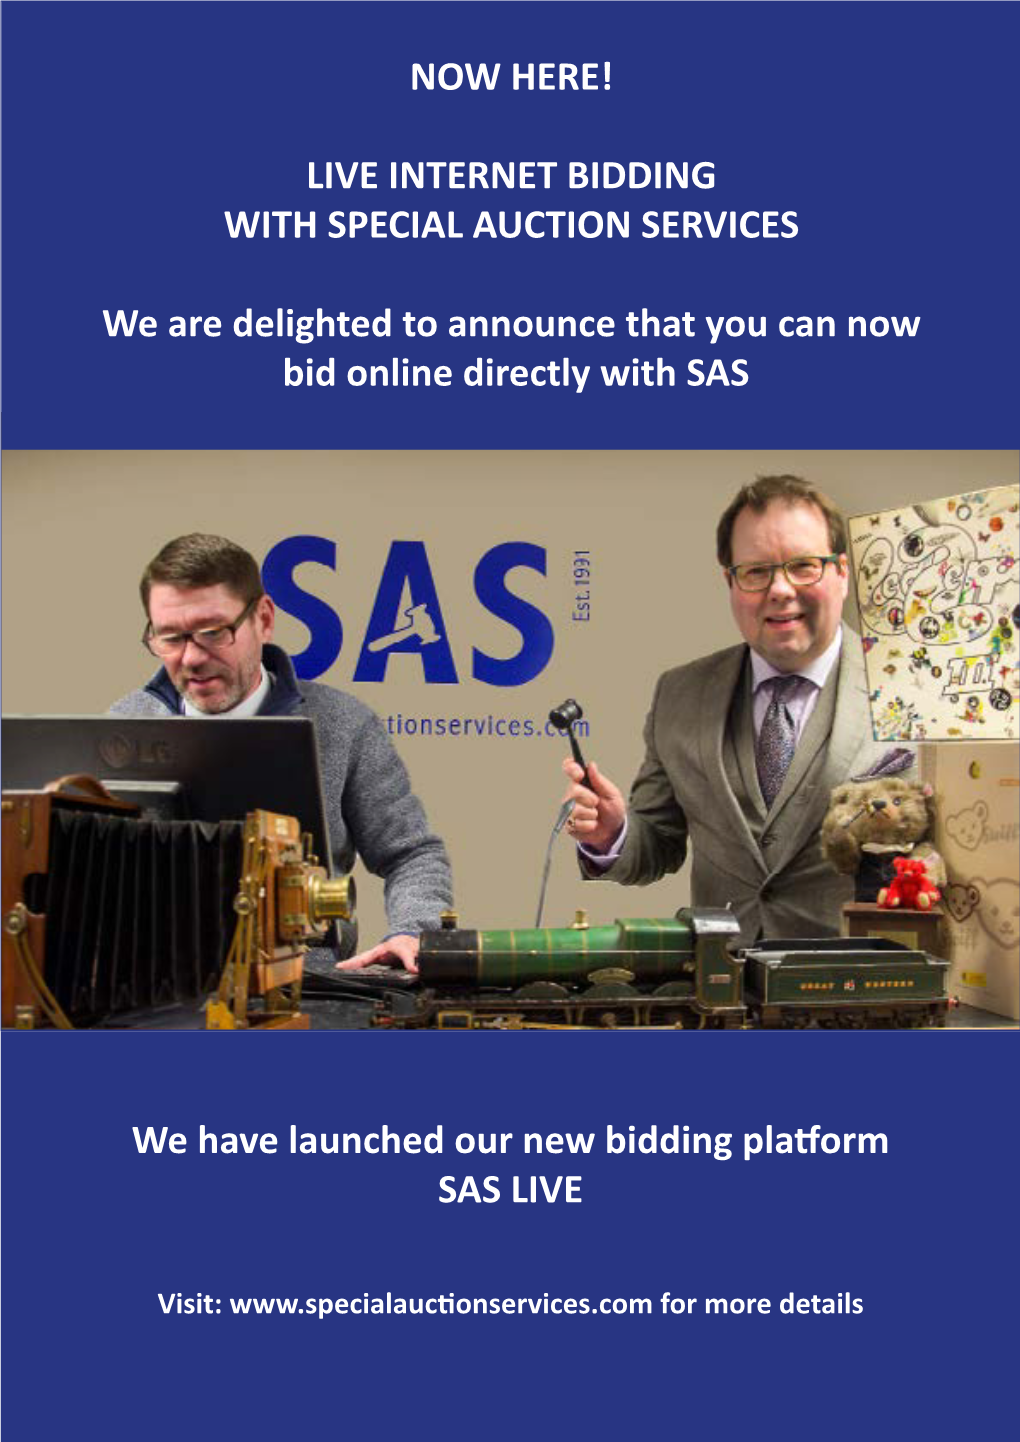 We Have Launched Our New Bidding Platform SAS LIVE